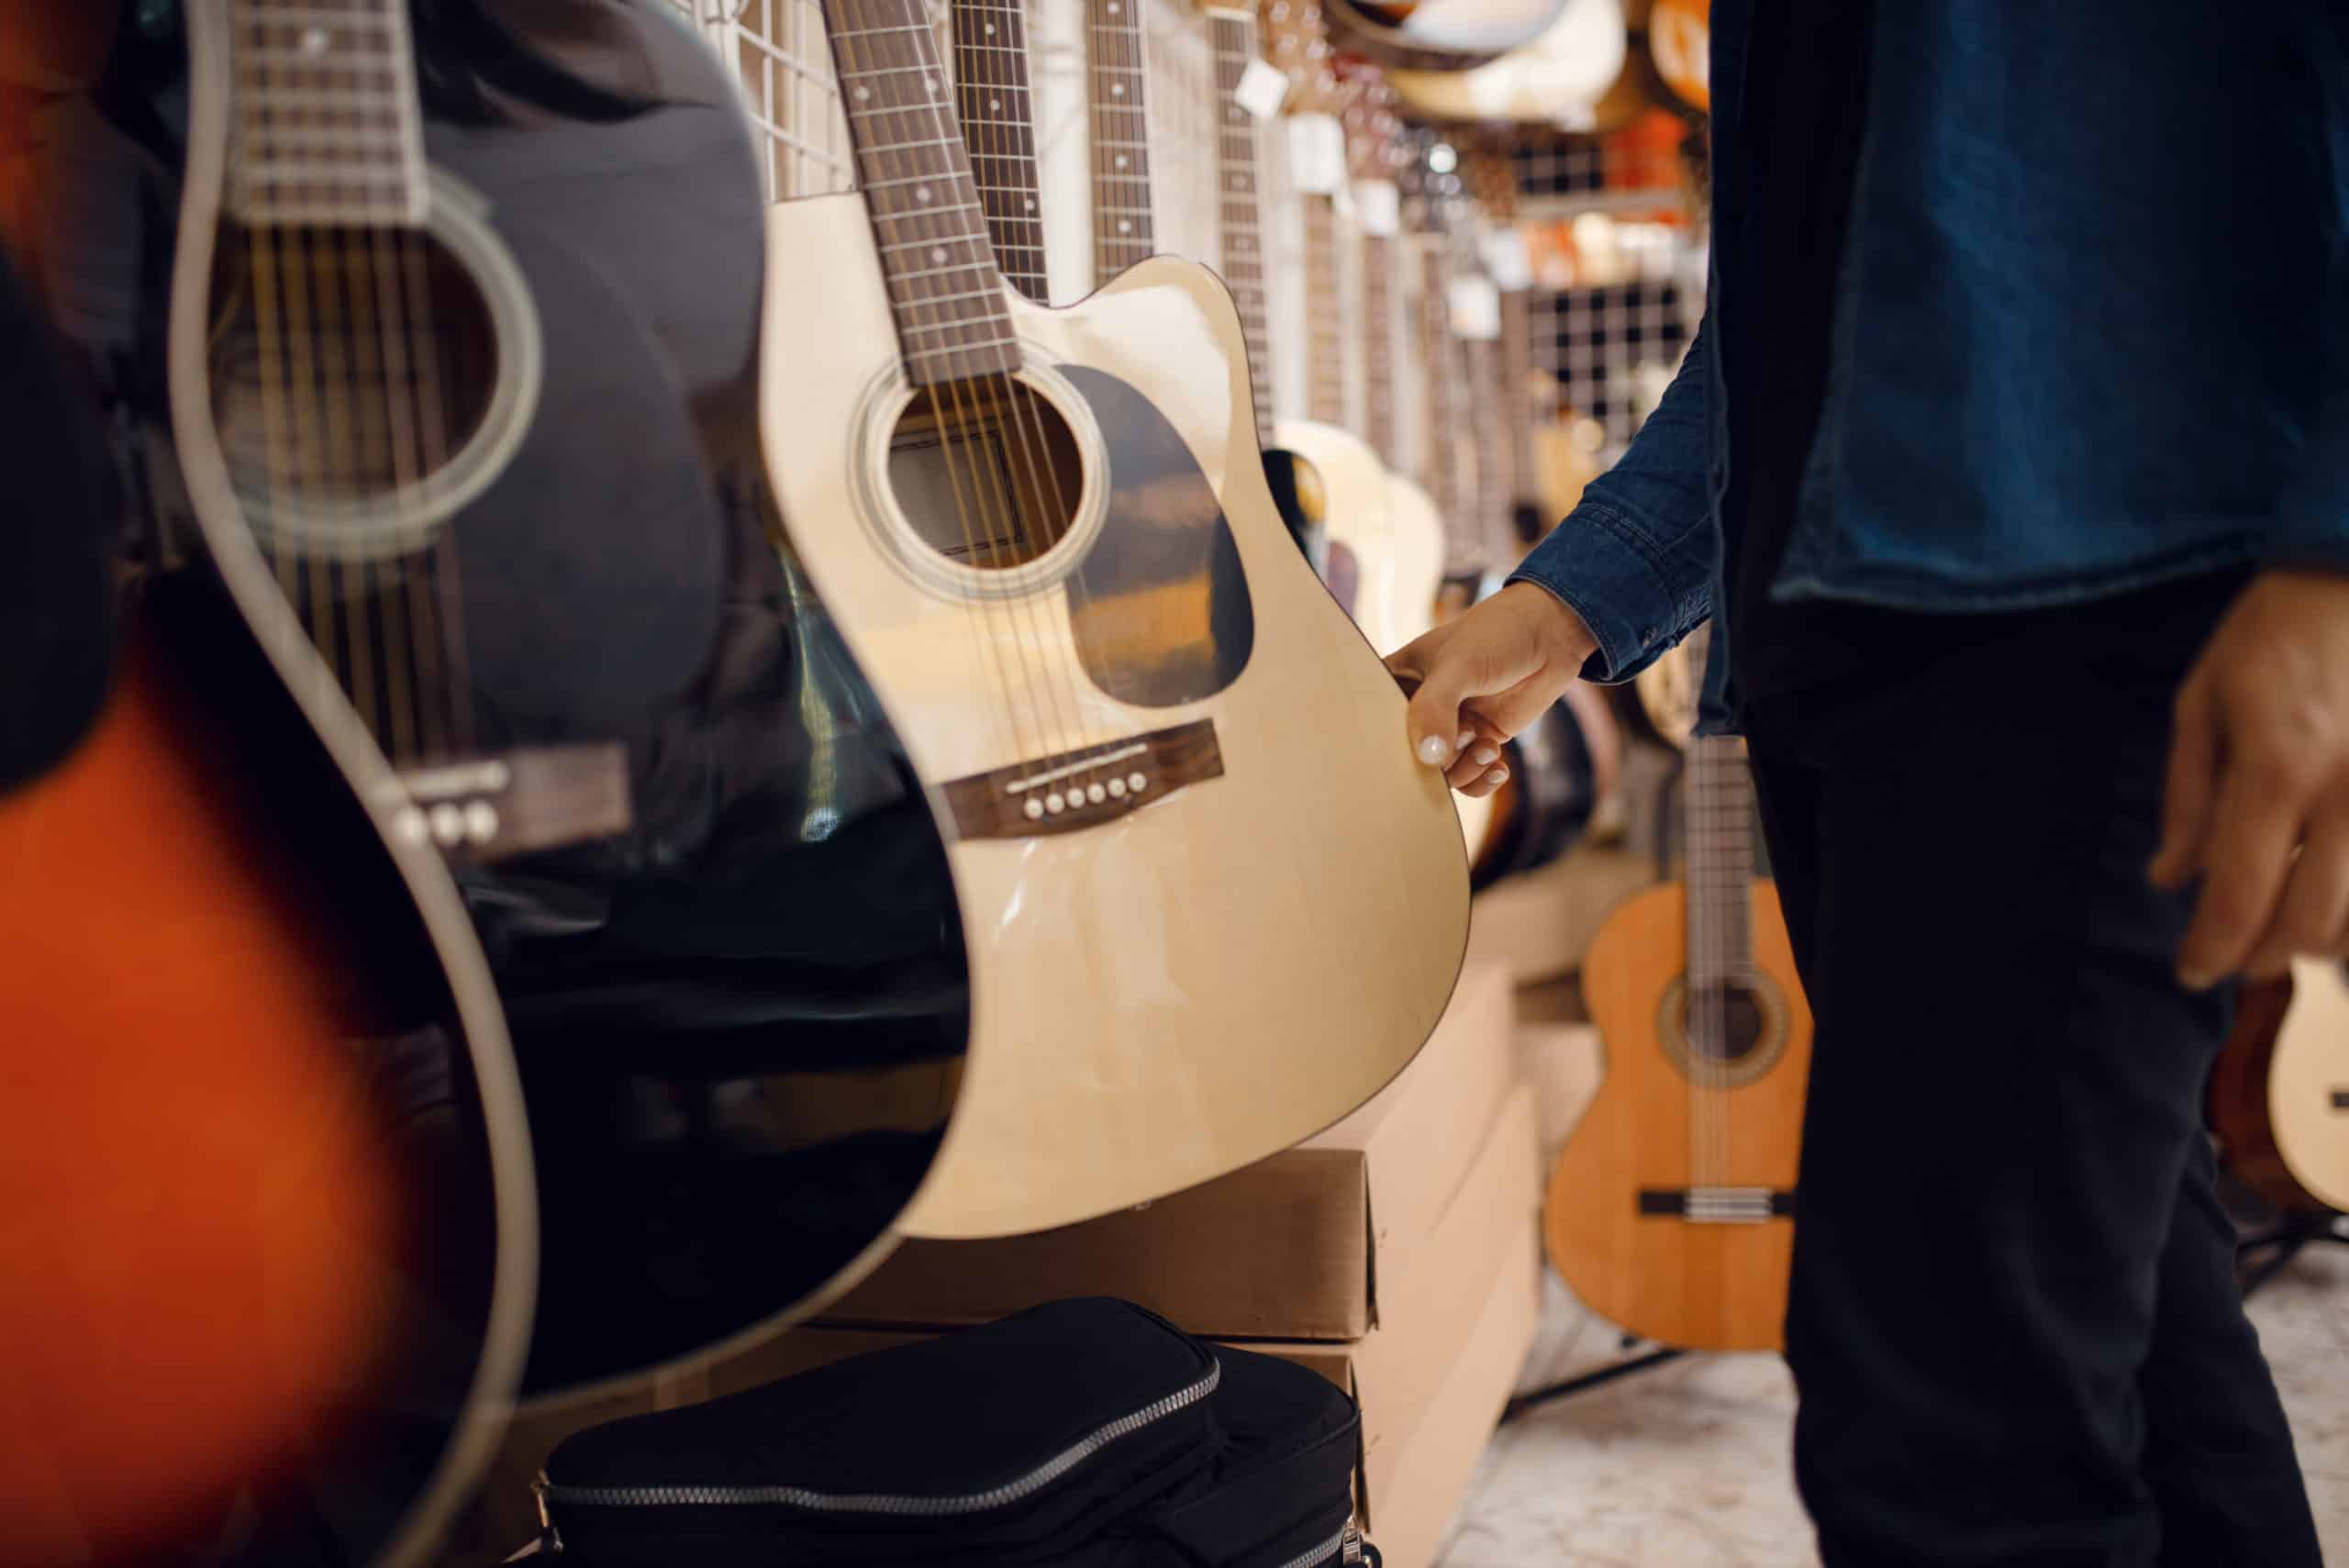 A man buying a guitar displayed at Howards Pawn & Jewelry.